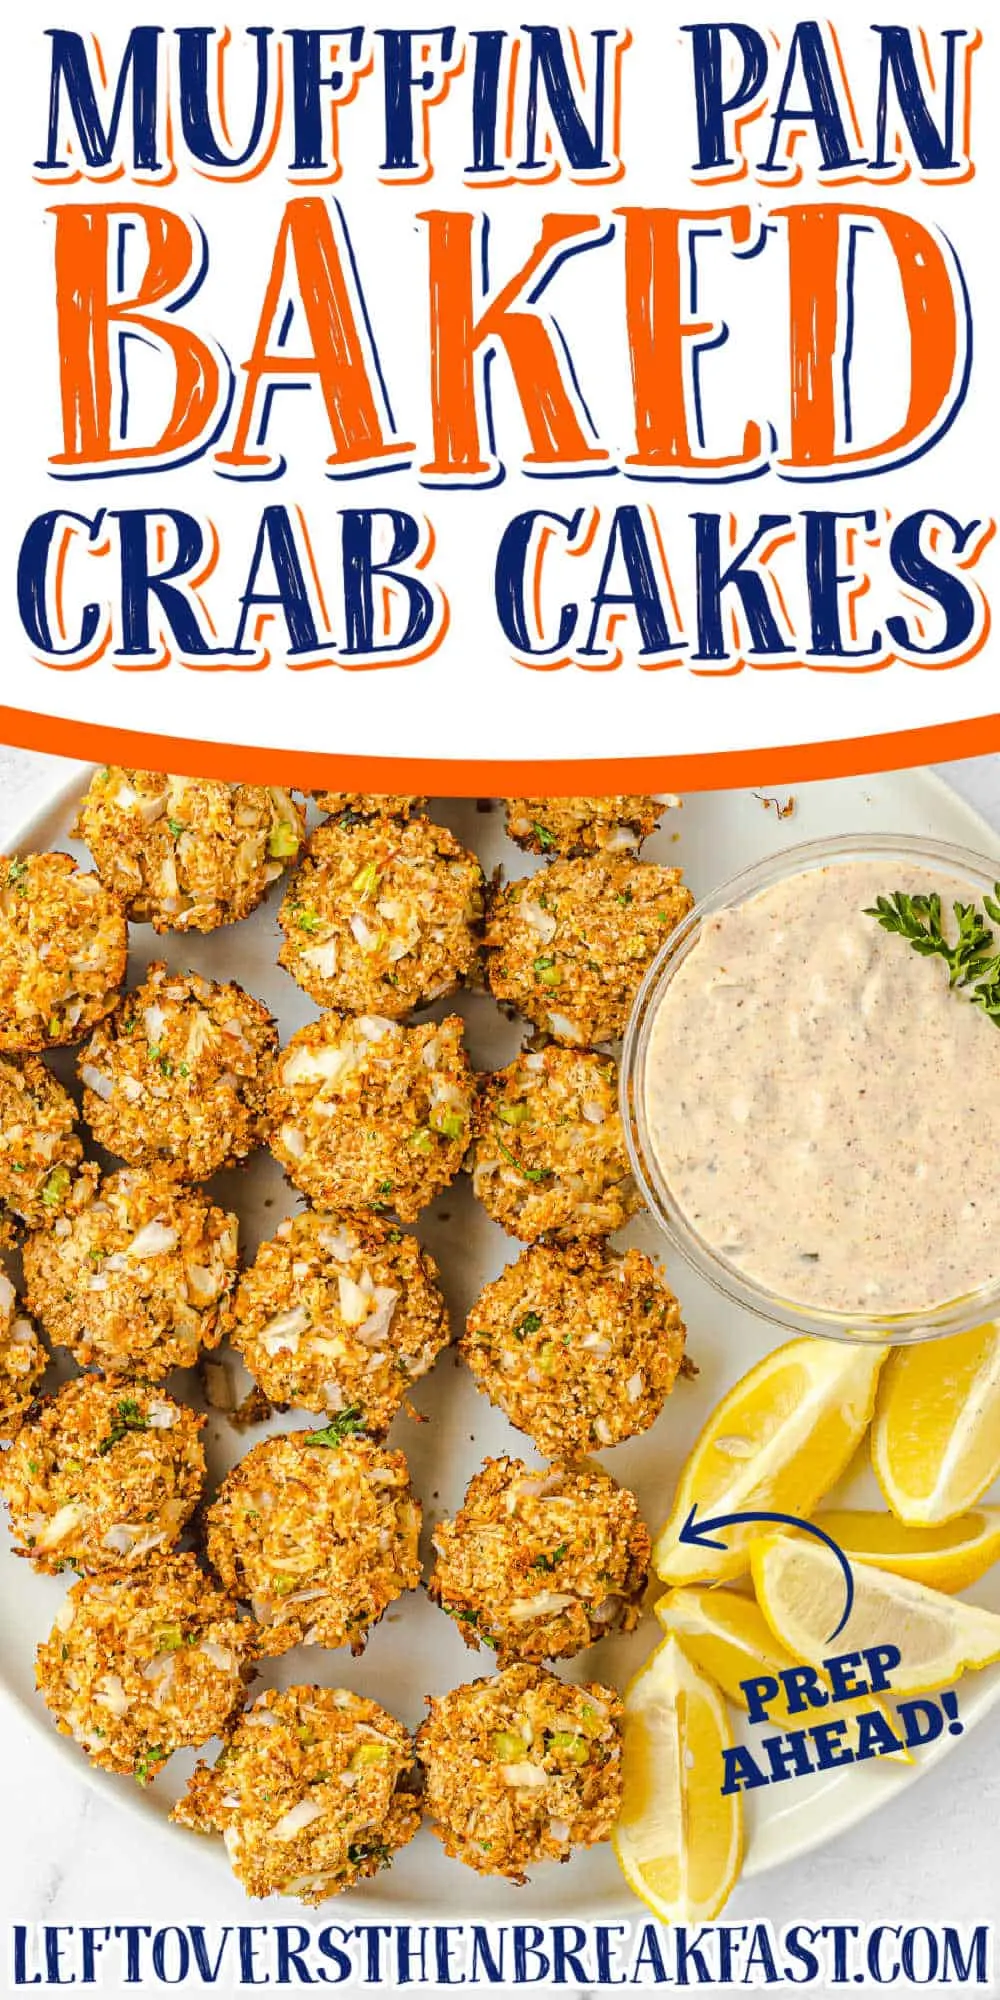 crab patties with text "muffin pan baked crab cakes"